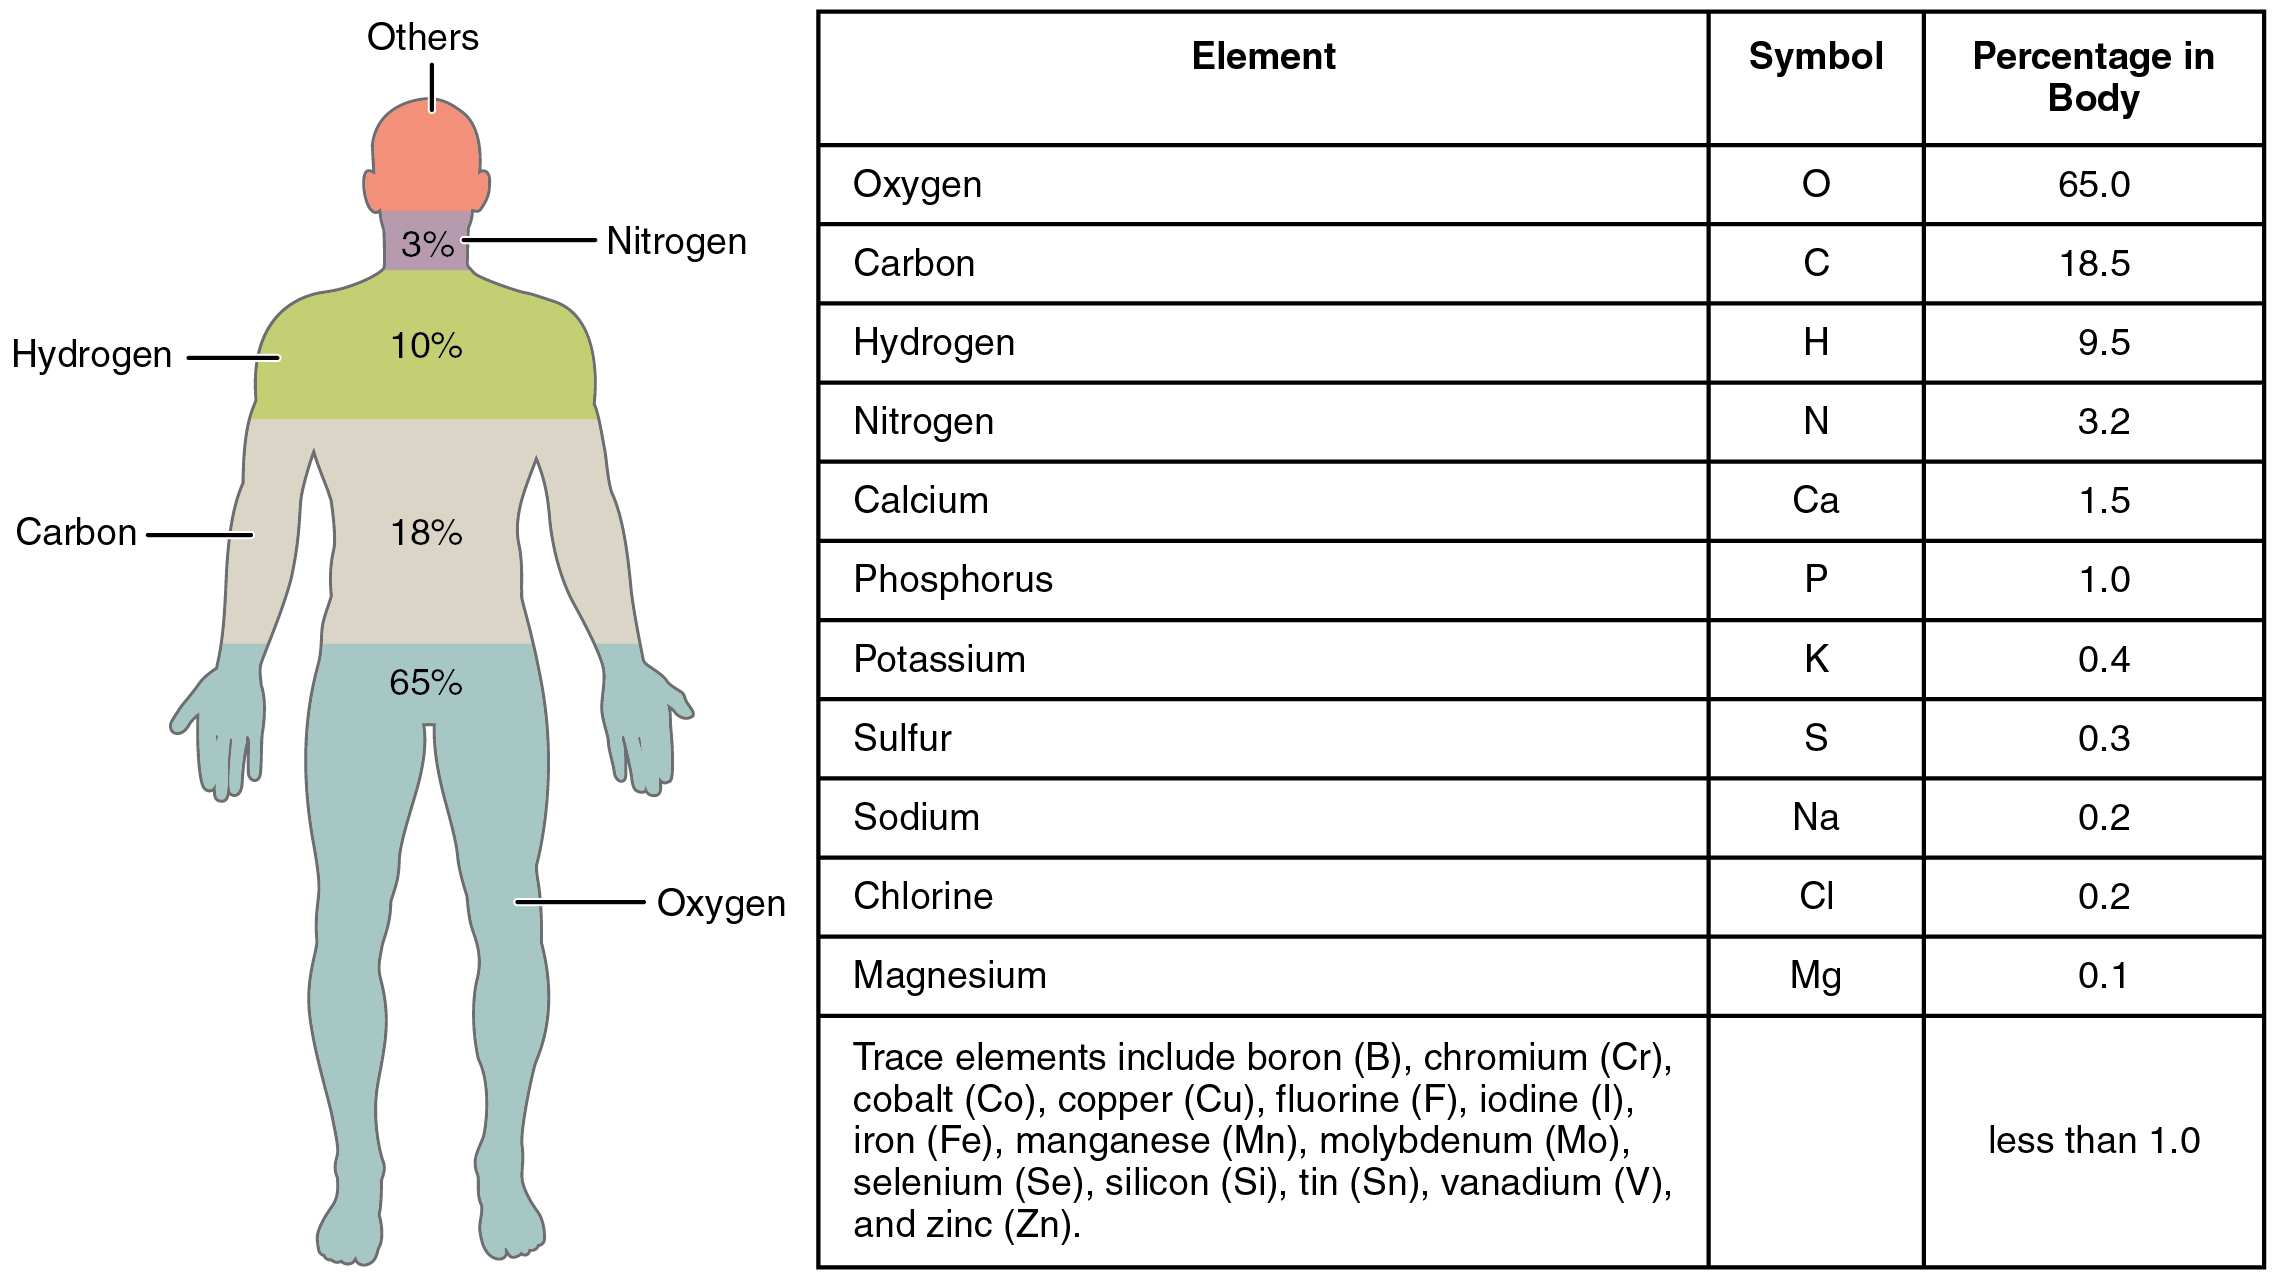 This figure shows a human body with the percentage of the main elements in the body, in the left panel. In the right panel, a table lists the elements and the percentages in the body.